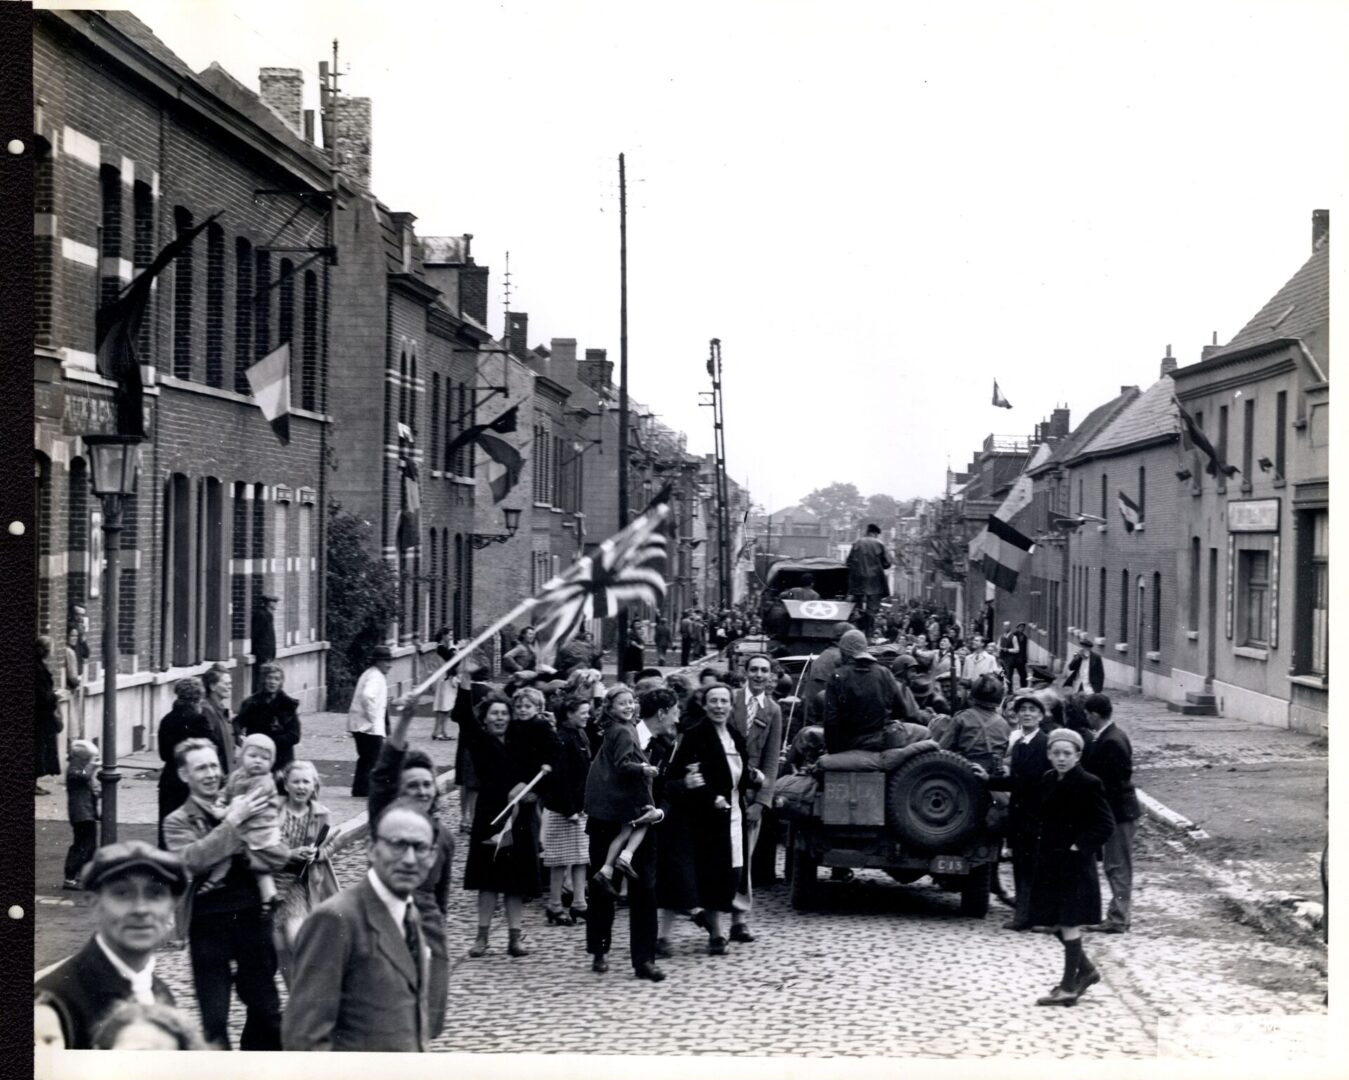 Residents of Couvin, Belgium welcoming the American troops